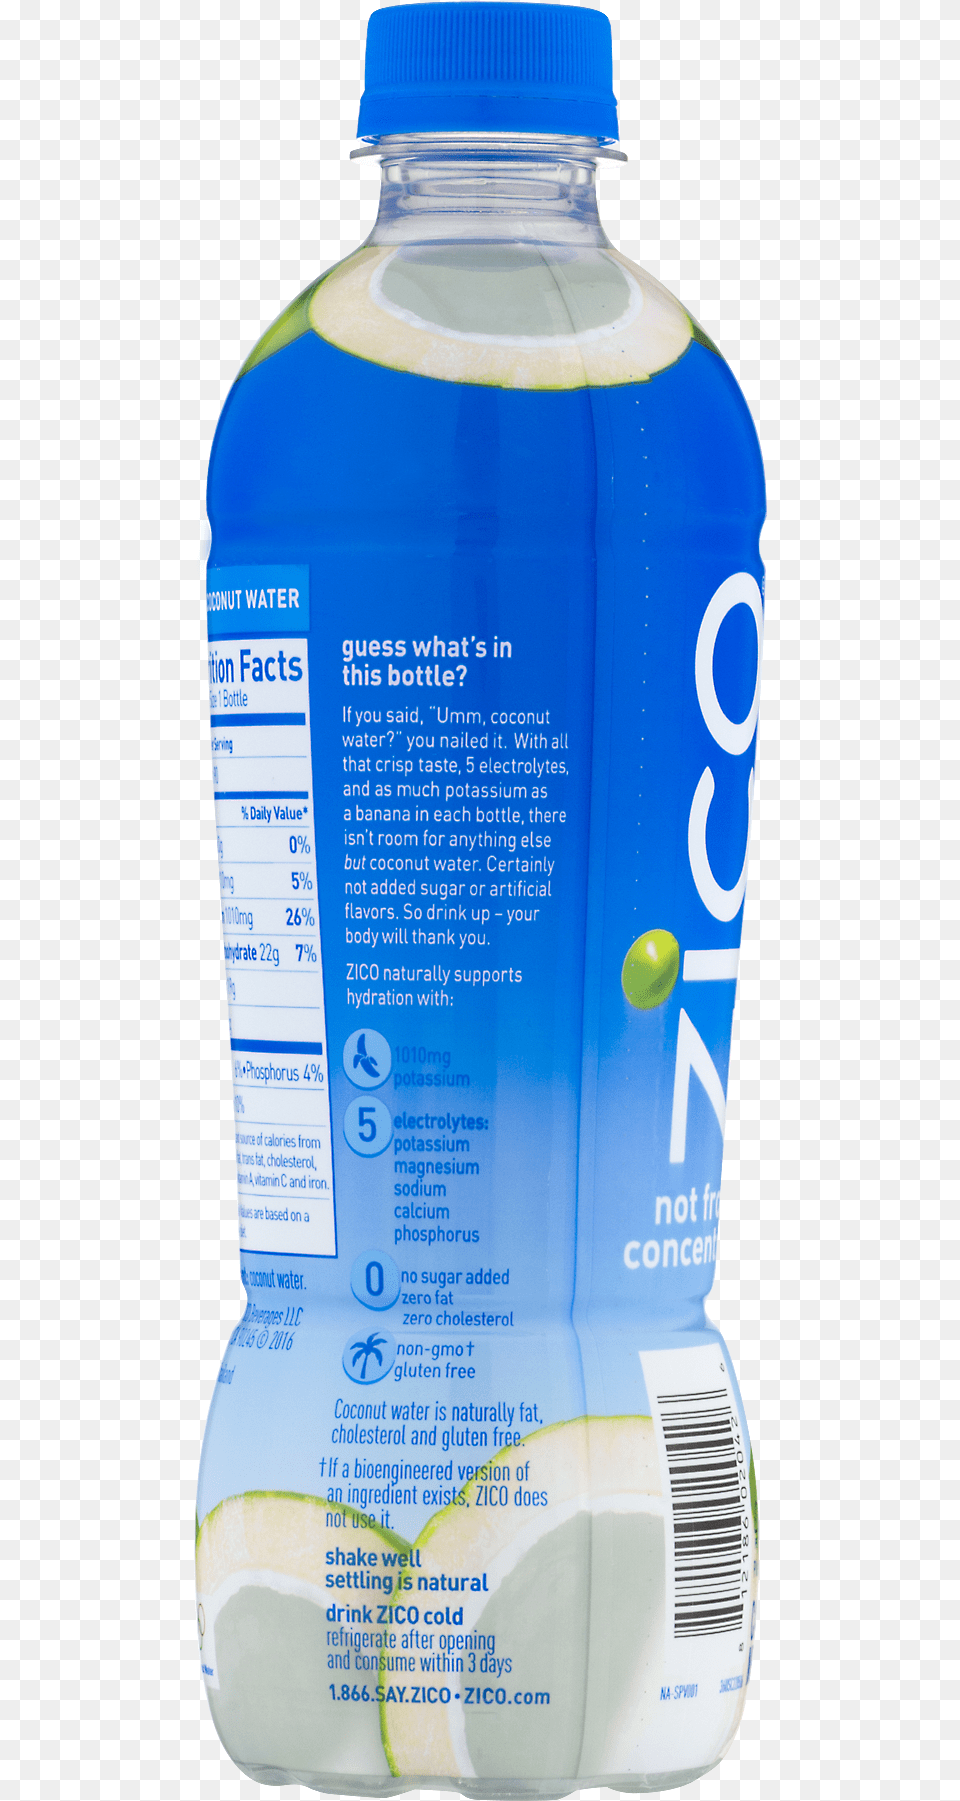 Zico Coconut Water Ingredients, Bottle, Can, Tin Png